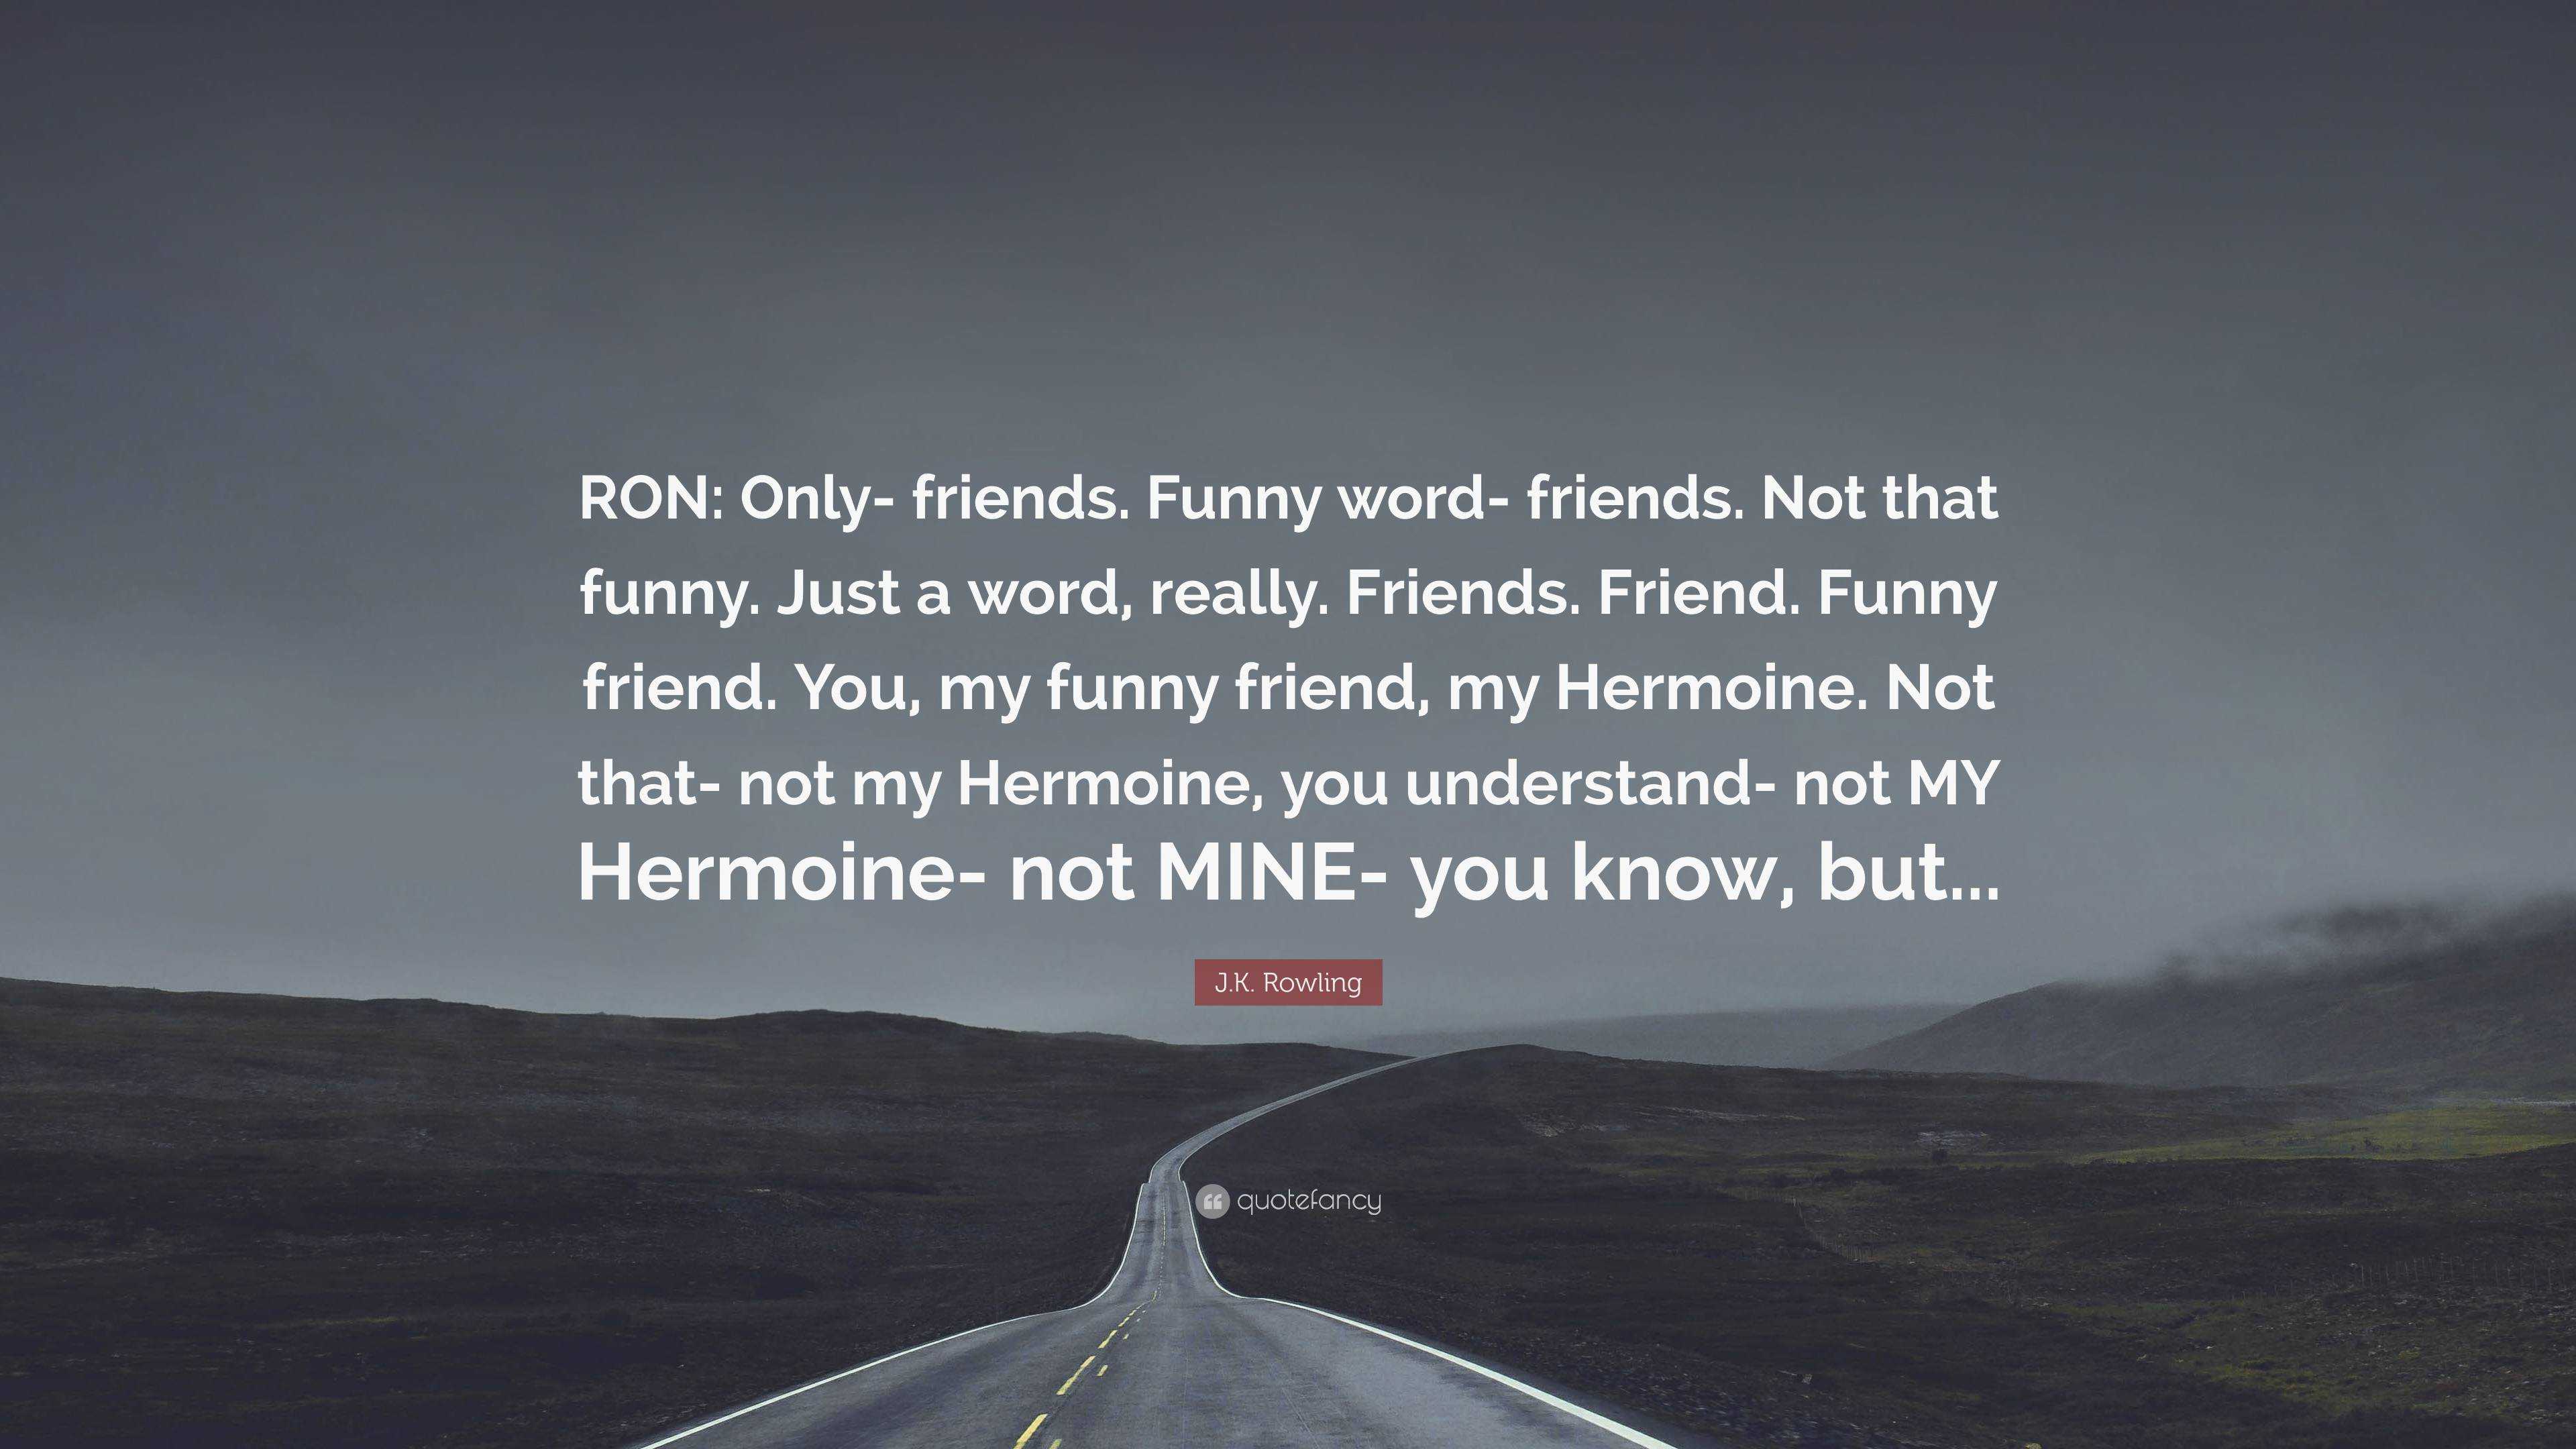 . Rowling Quote: “RON: Only- friends. Funny word- friends. Not that funny.  Just a word, really. Friends. Friend. Funny friend. You, my fun...”